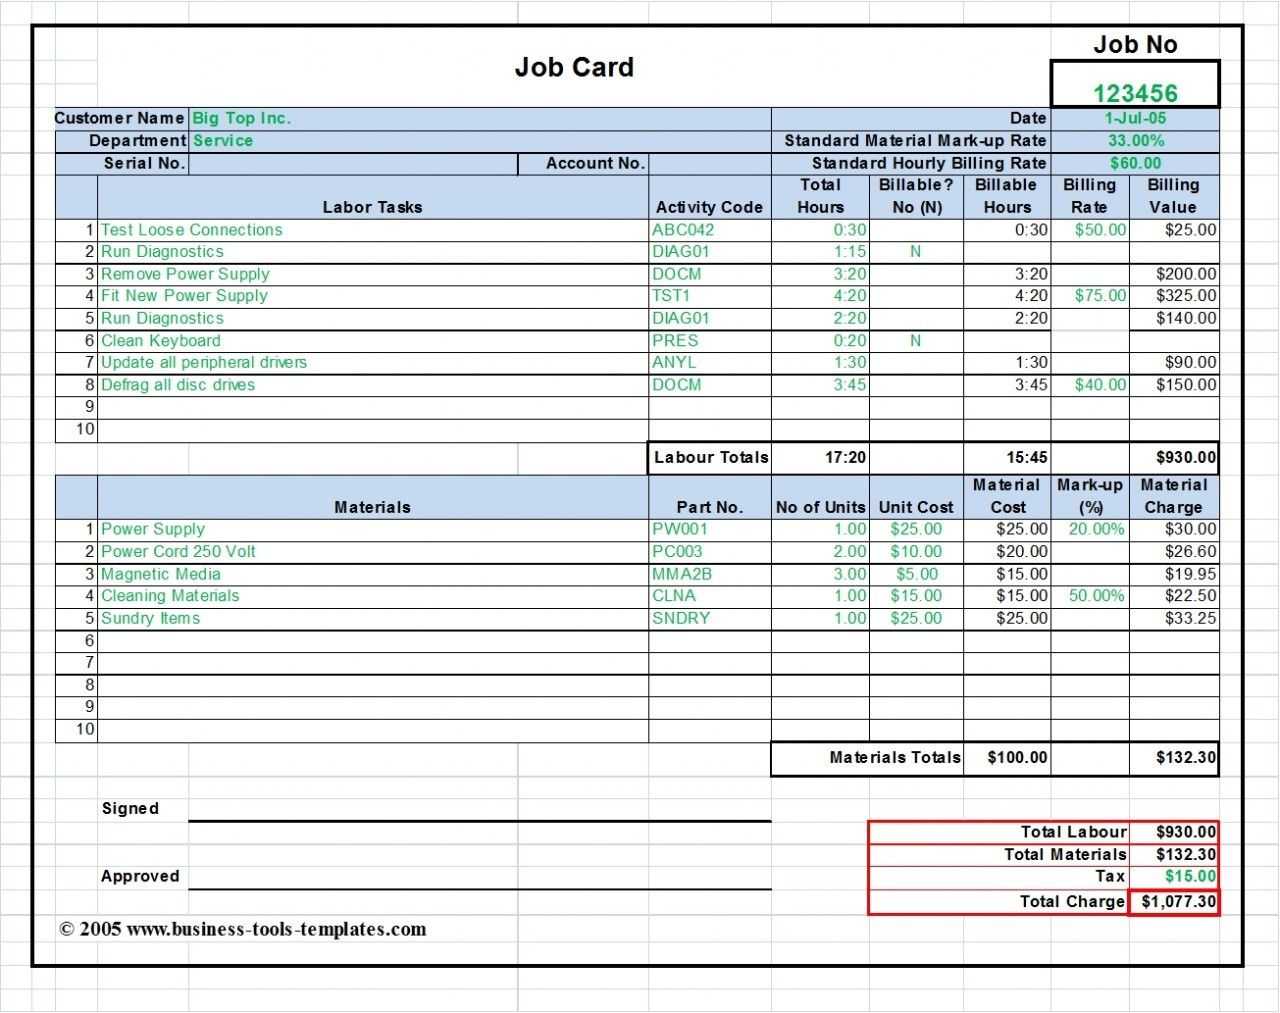 Workshop Job Card Template Excel, Labor & Material Cost With Regard To Job Cost Report Template Excel